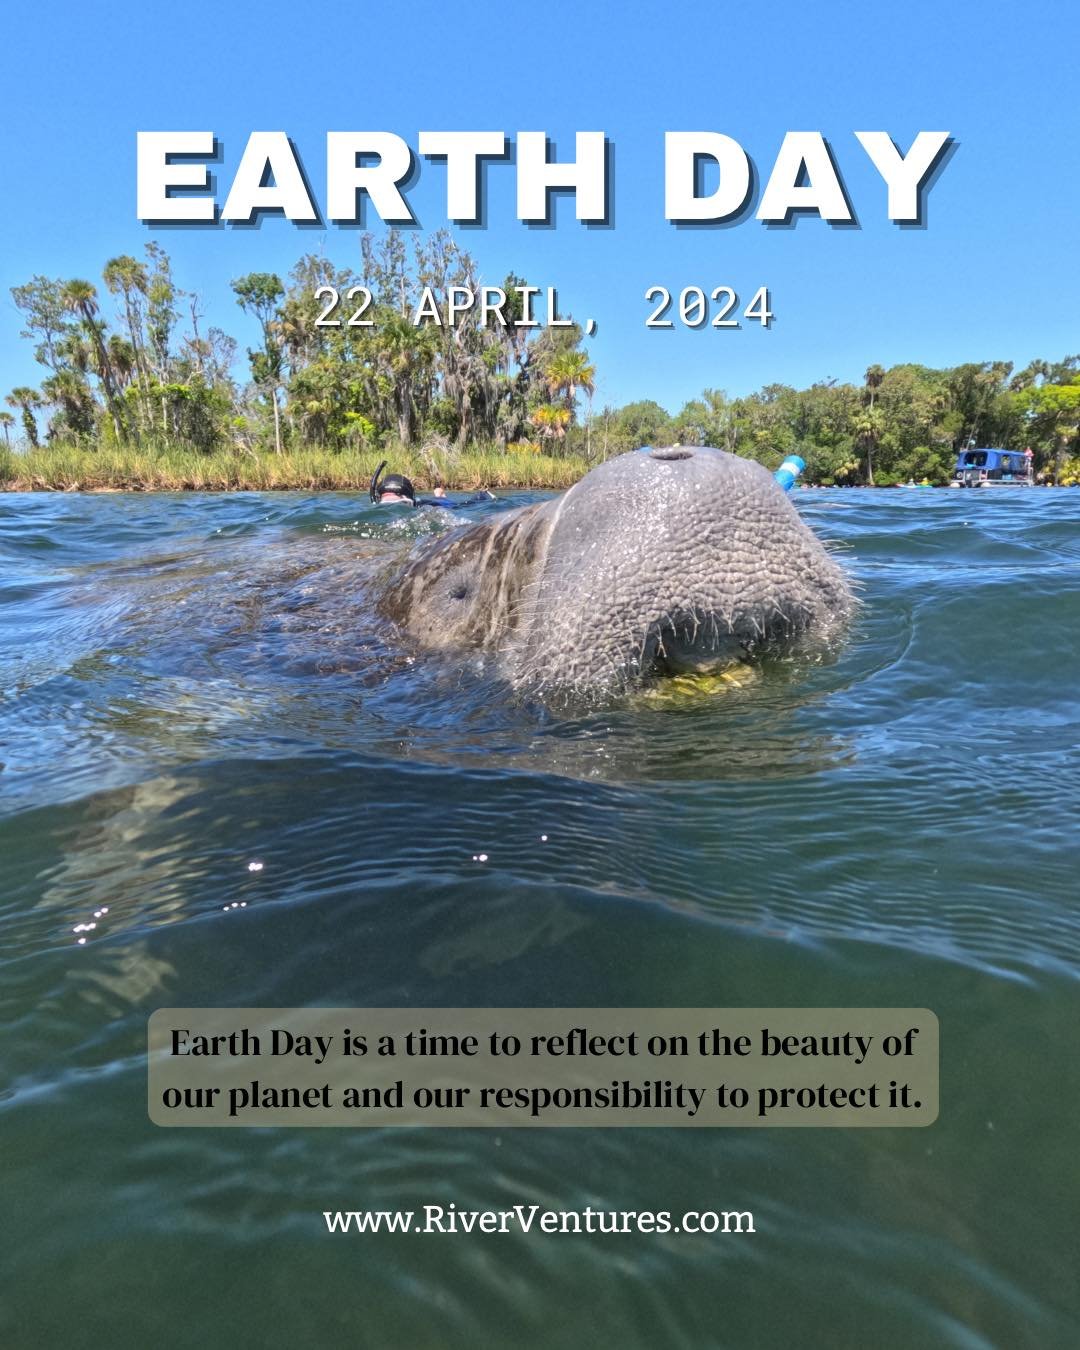 🌍🌊 Happy Earth Day! 🌊🌍 Let's take a moment to appreciate the beauty of our planet and all its magnificent creatures. Today (and every day at River Ventures), we&rsquo;re highlighting the gentle giants of Crystal River, Florida - the adorable mana